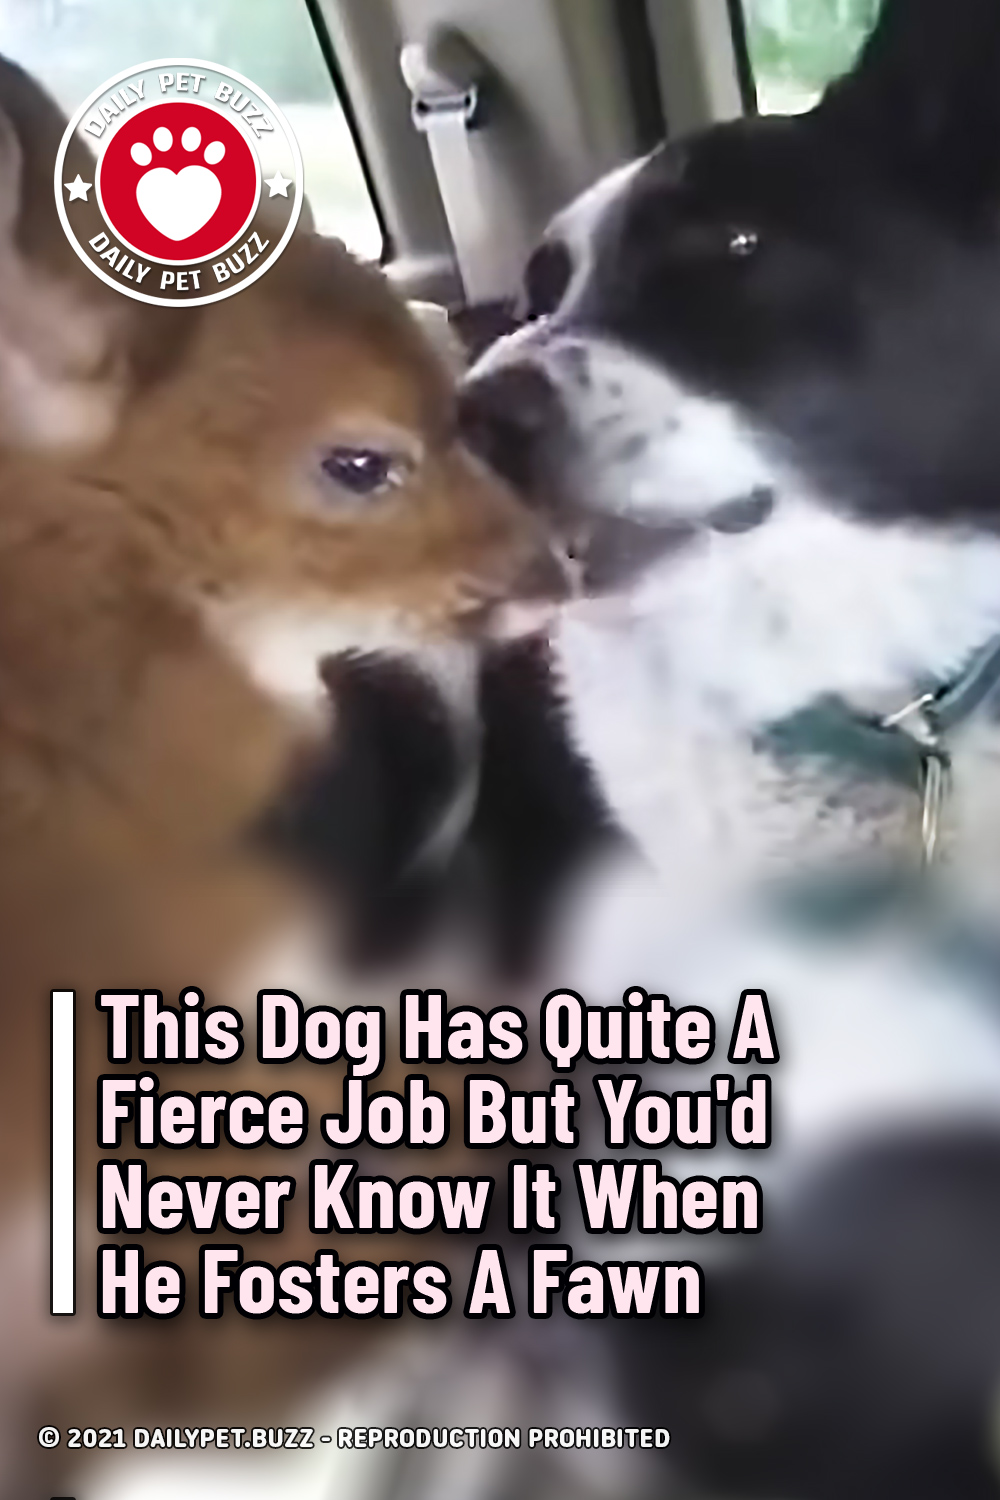 This Dog Has Quite A Fierce Job But You\'d Never Know It When He Fosters A Fawn